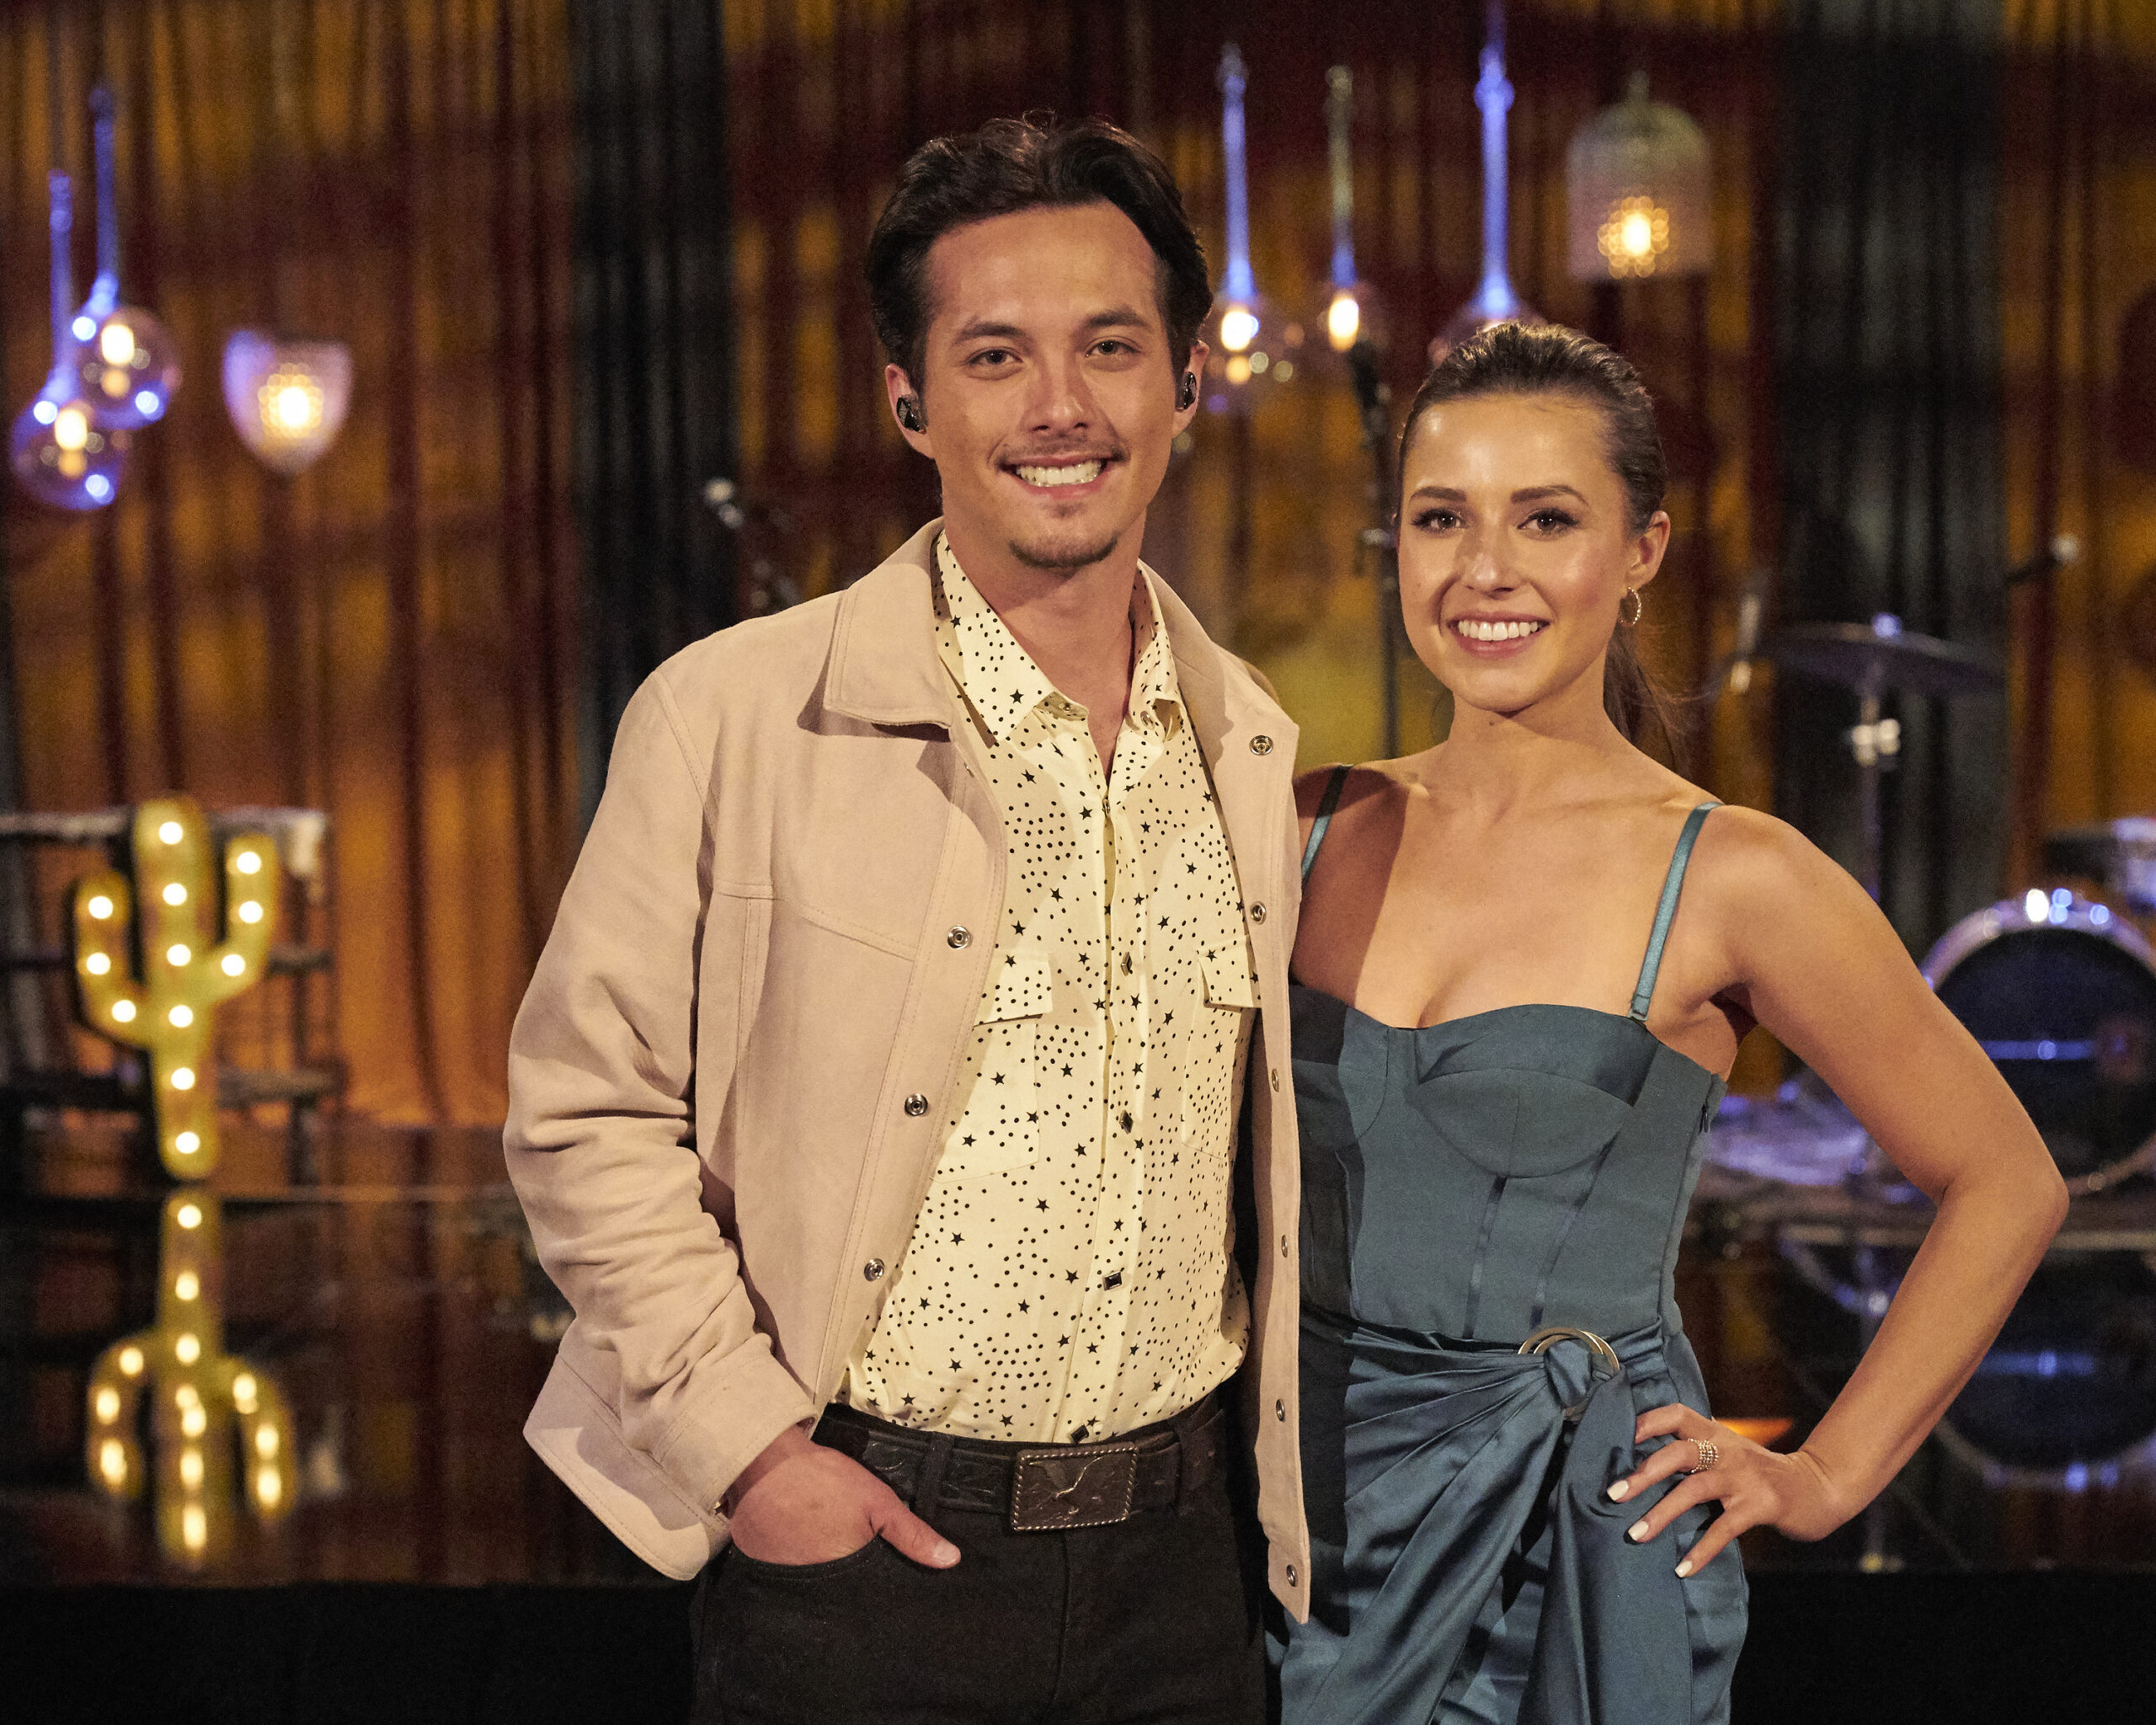 Laine Hardy Lends His Musical Talents to ABC’s “The Bachelorette”